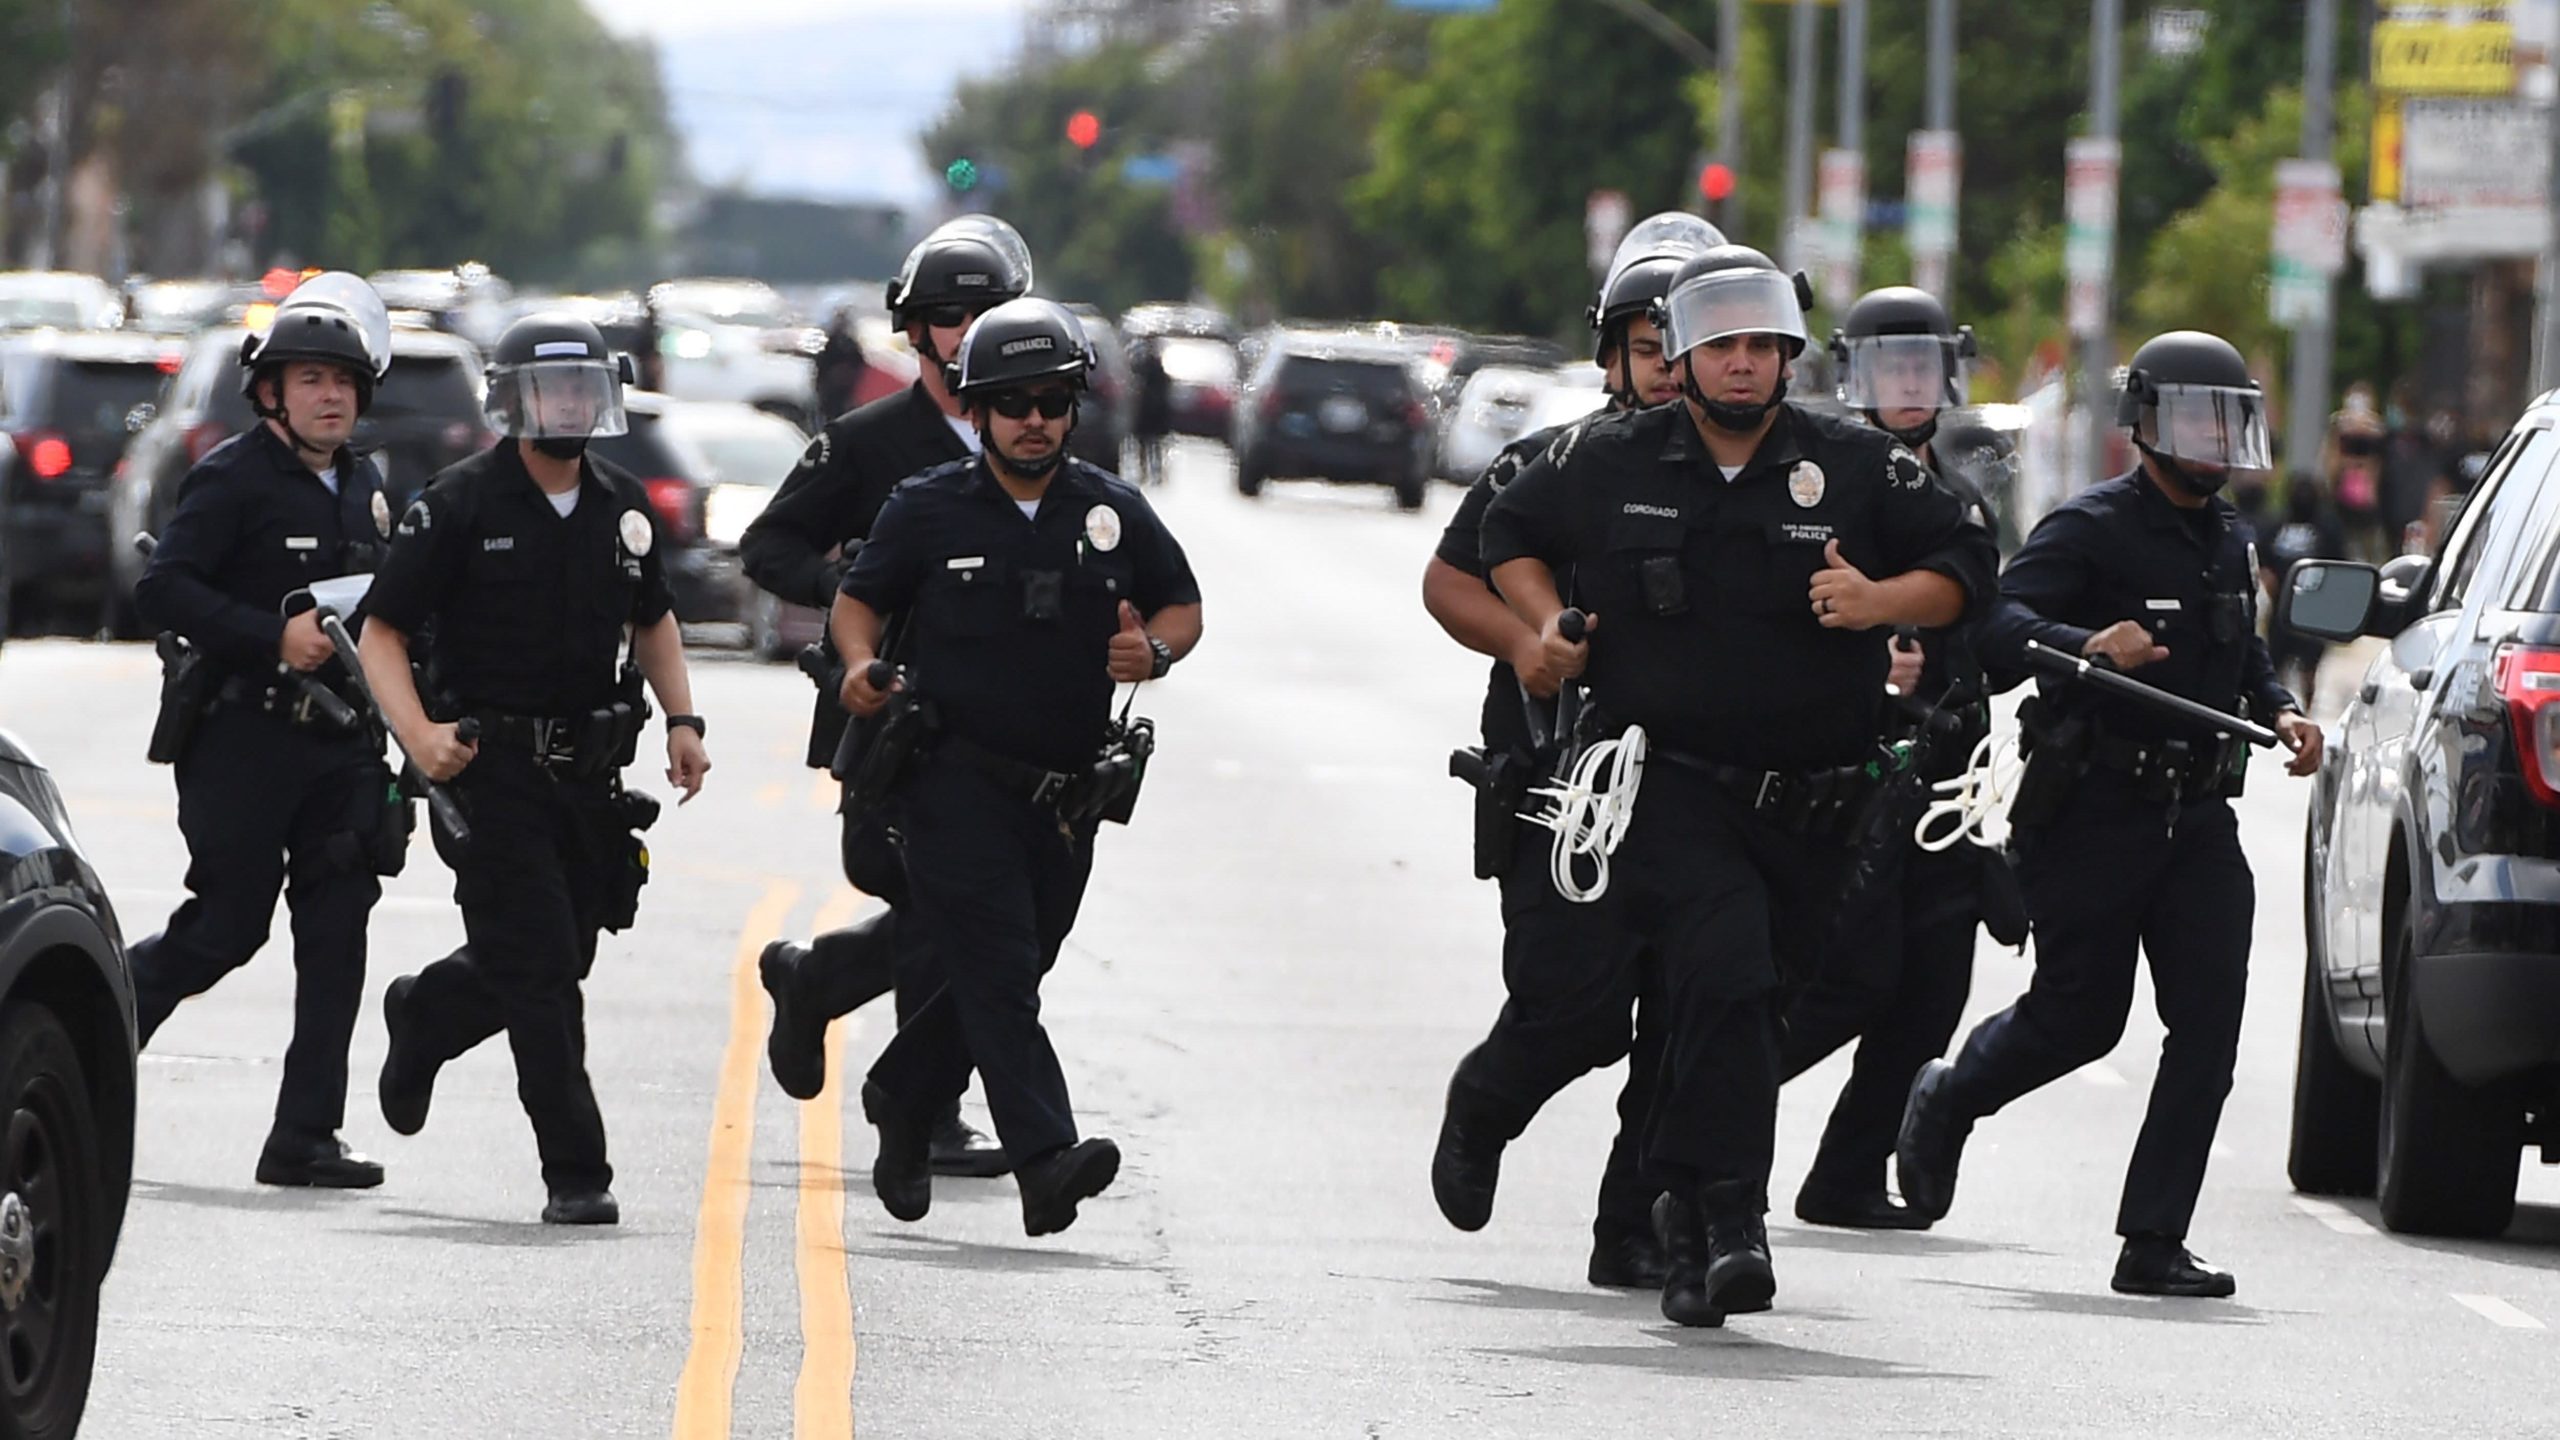 Officers mobilizing in Van Nuys, Los Angeles on June 1, 2020. (Photo: Robyn Beck, AP)